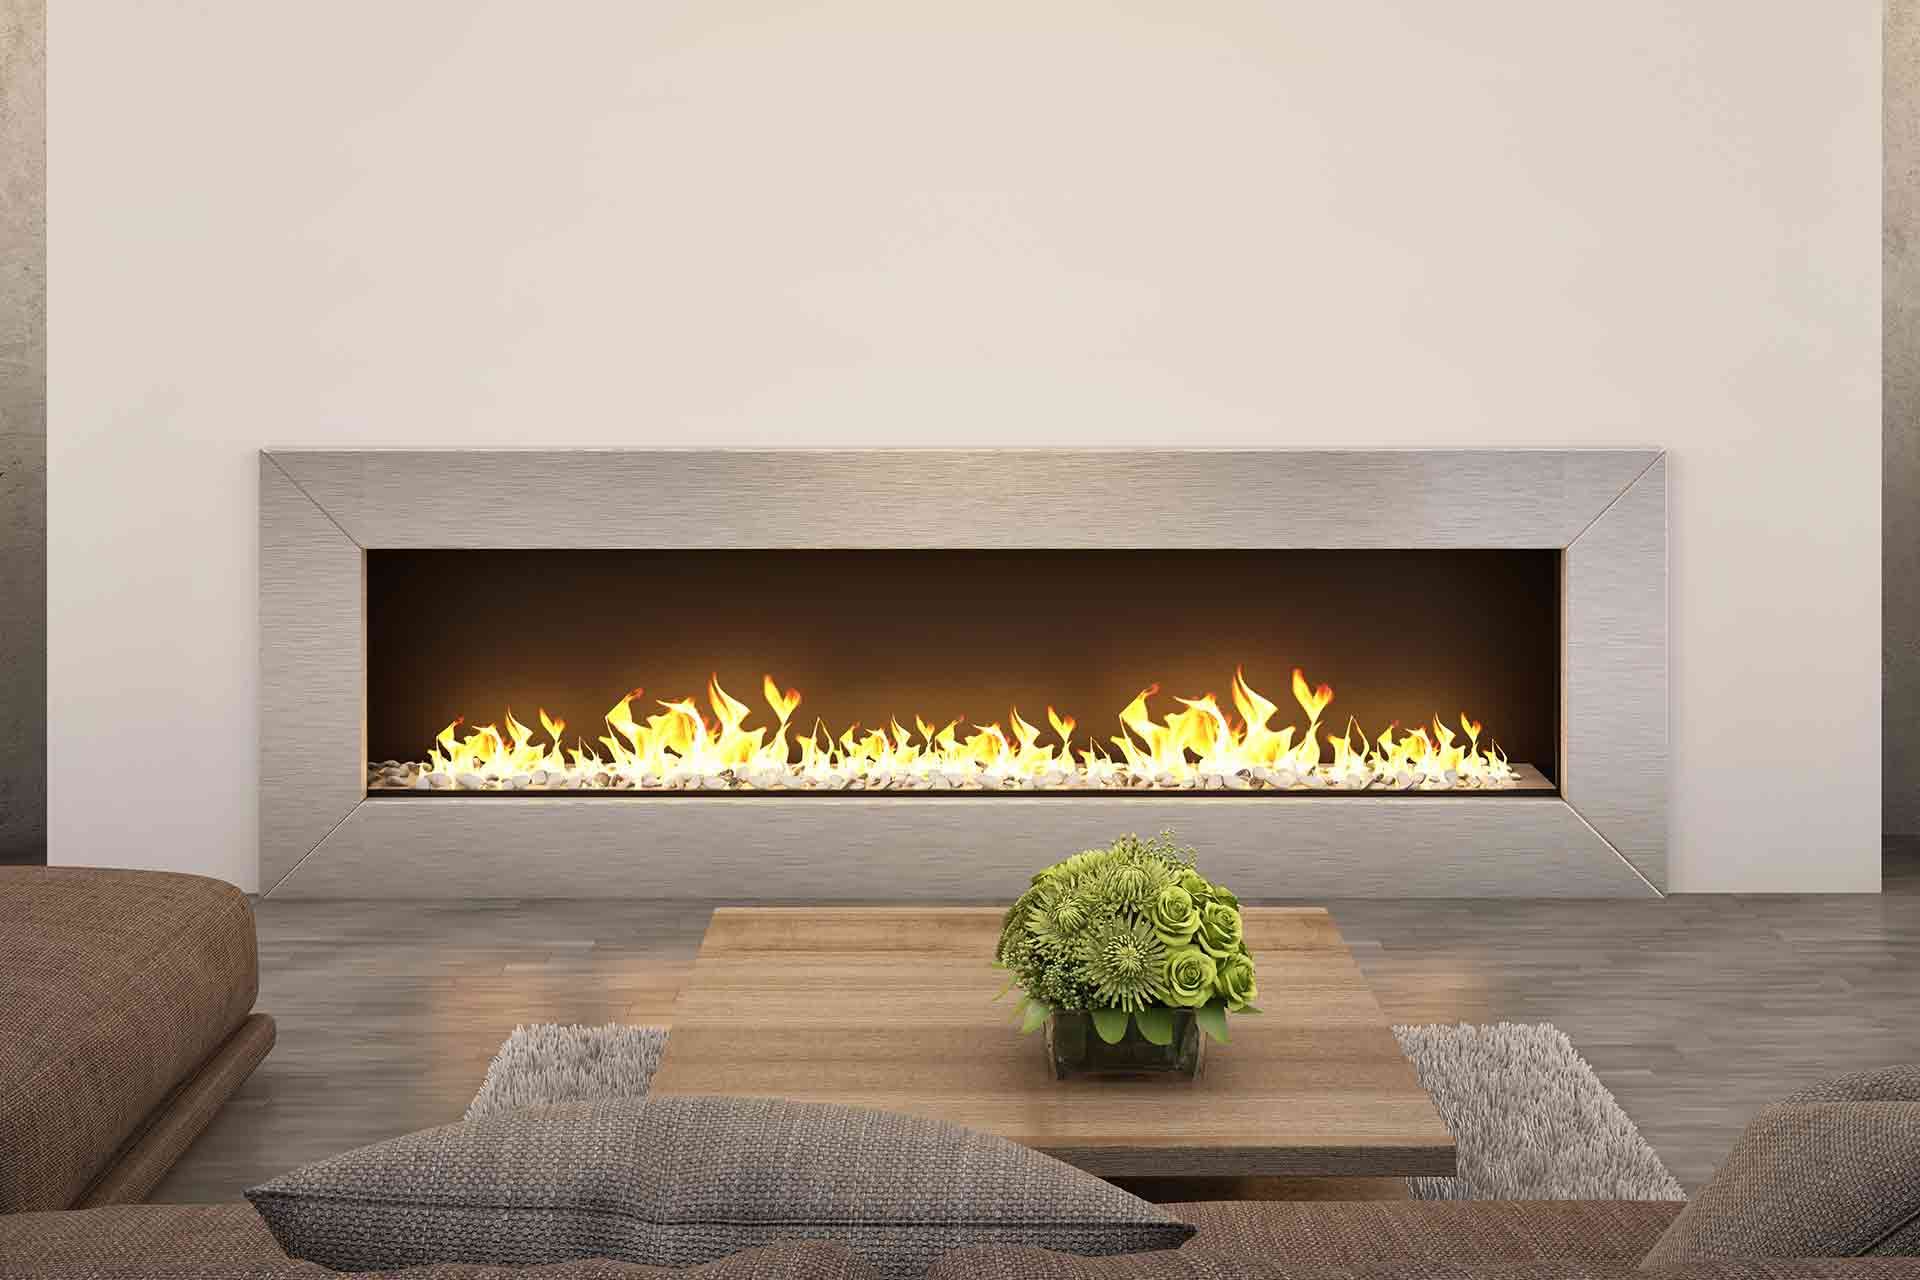 How Much Does It Cost To Run Electric Fireplace